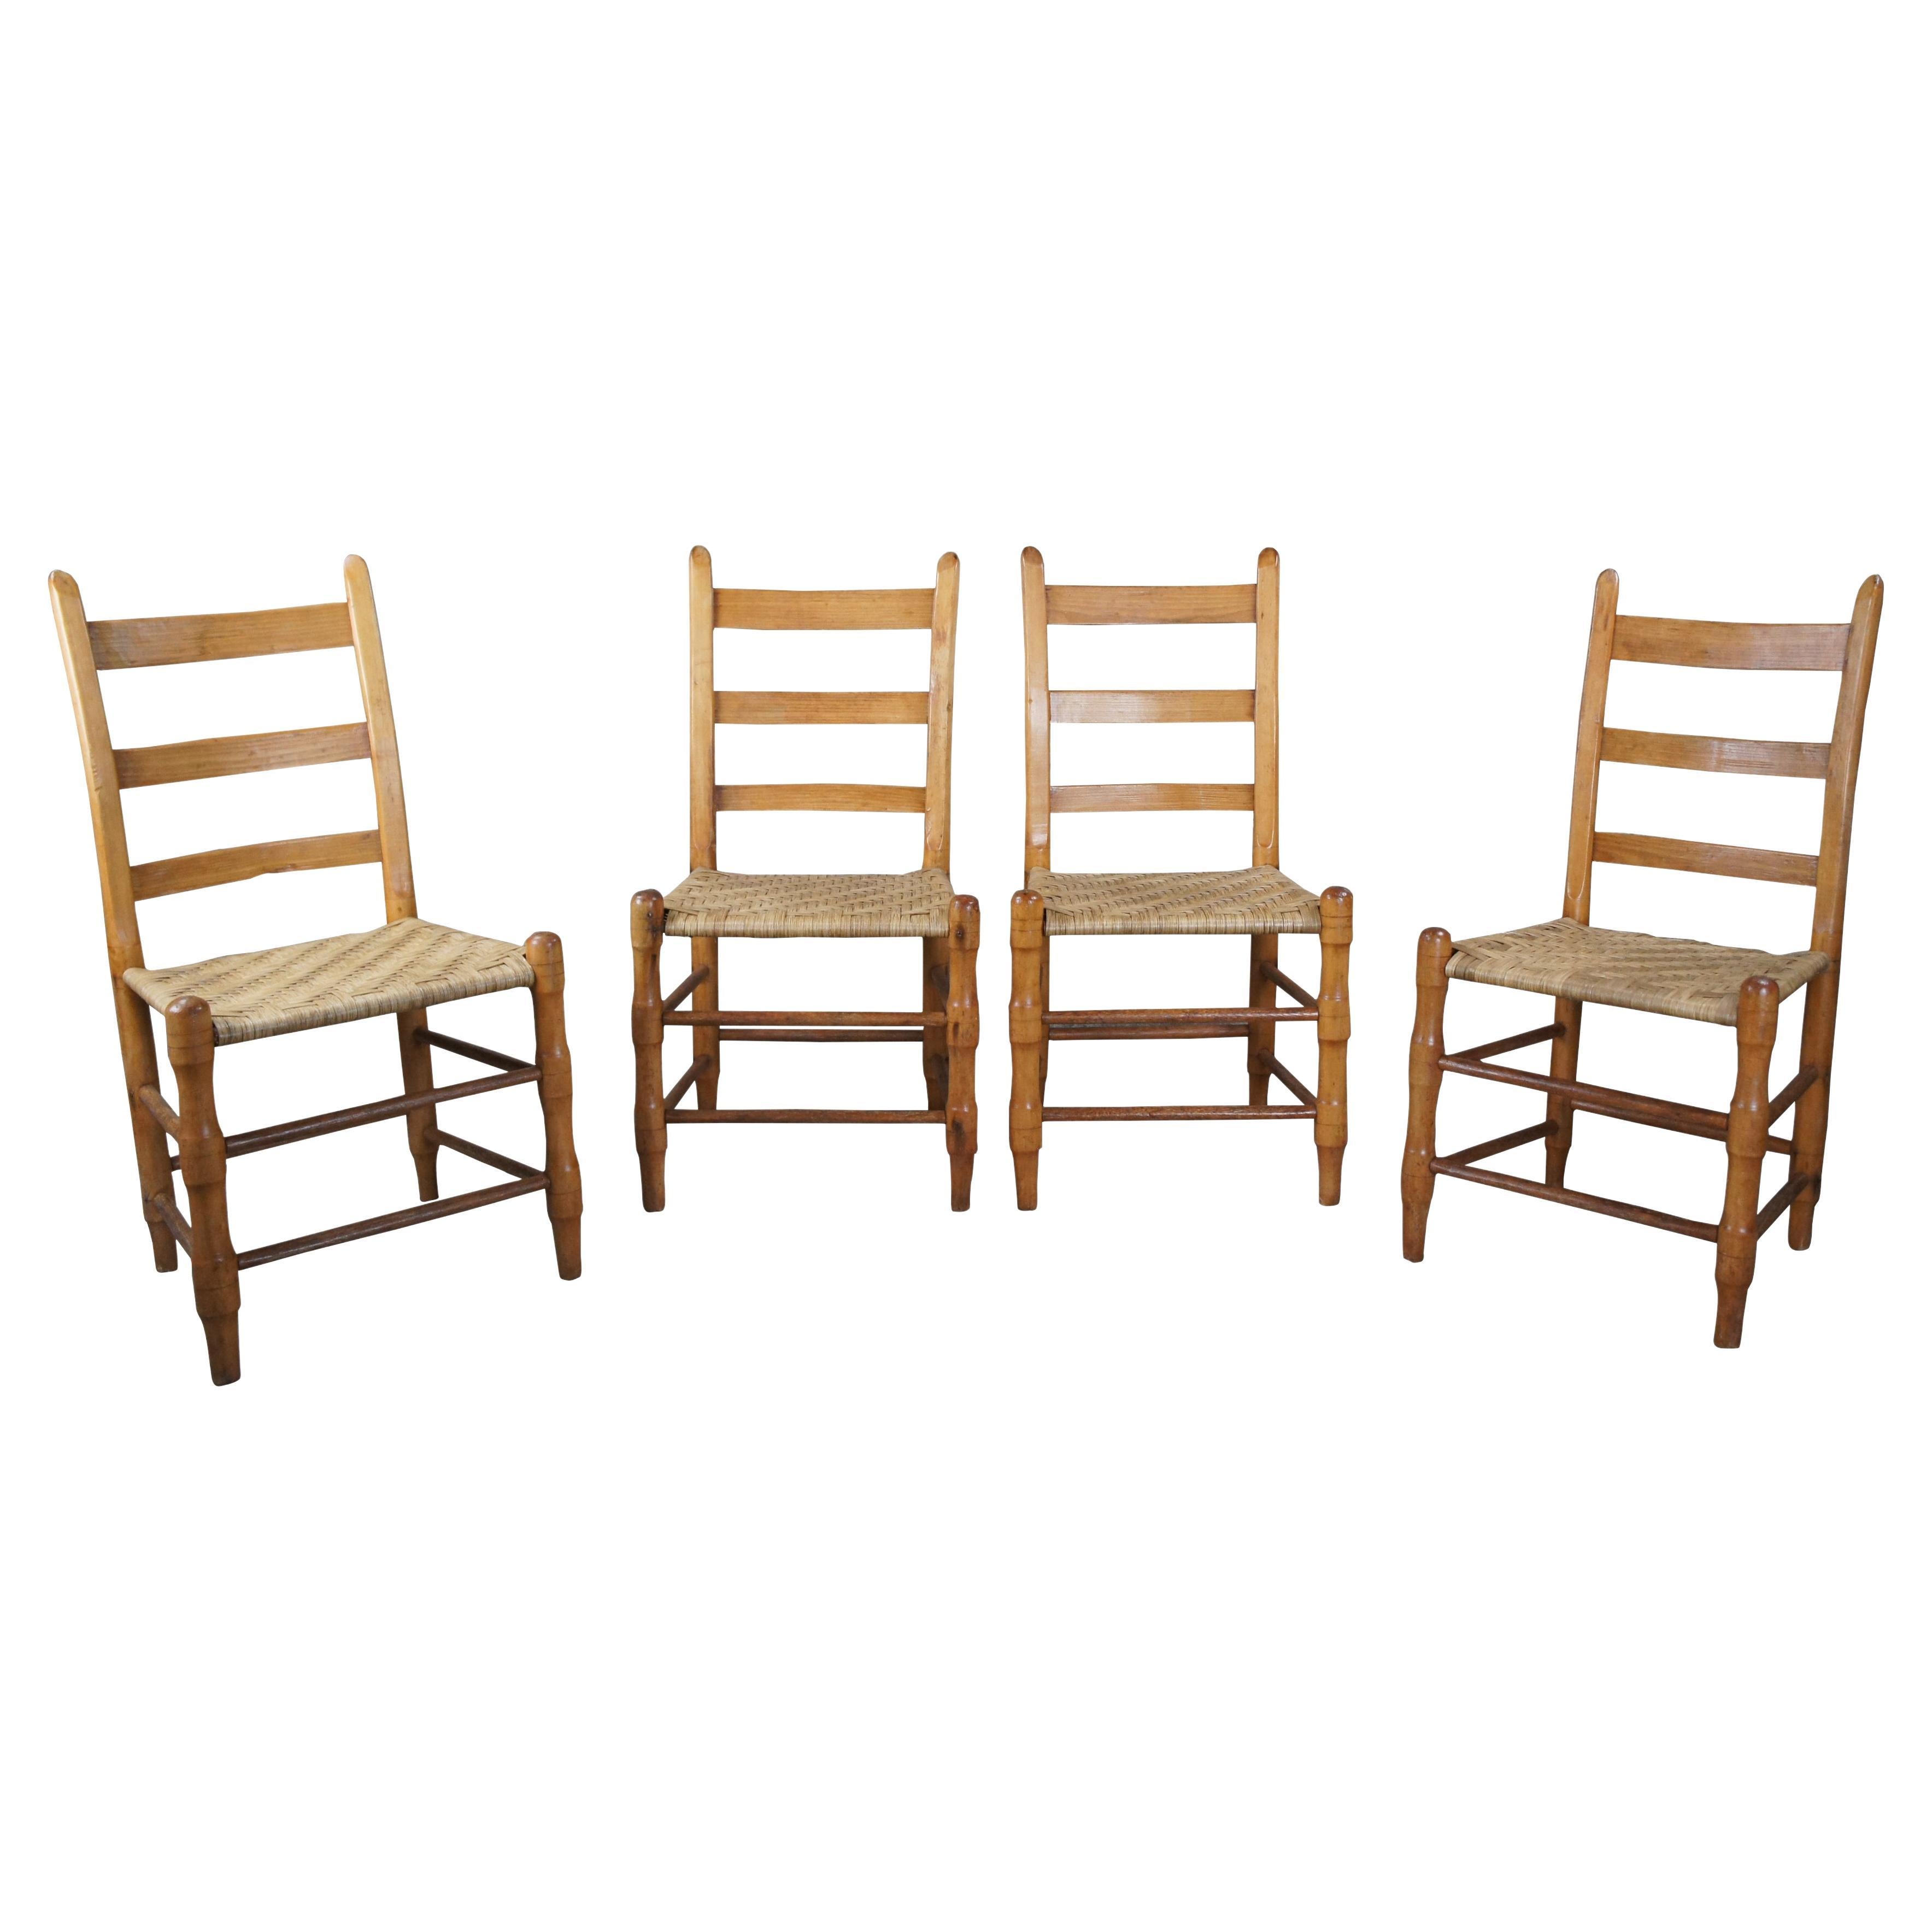 4 Antique Primitive Shaker Maple Farmhouse Country Ladderback Rush Dining Chairs